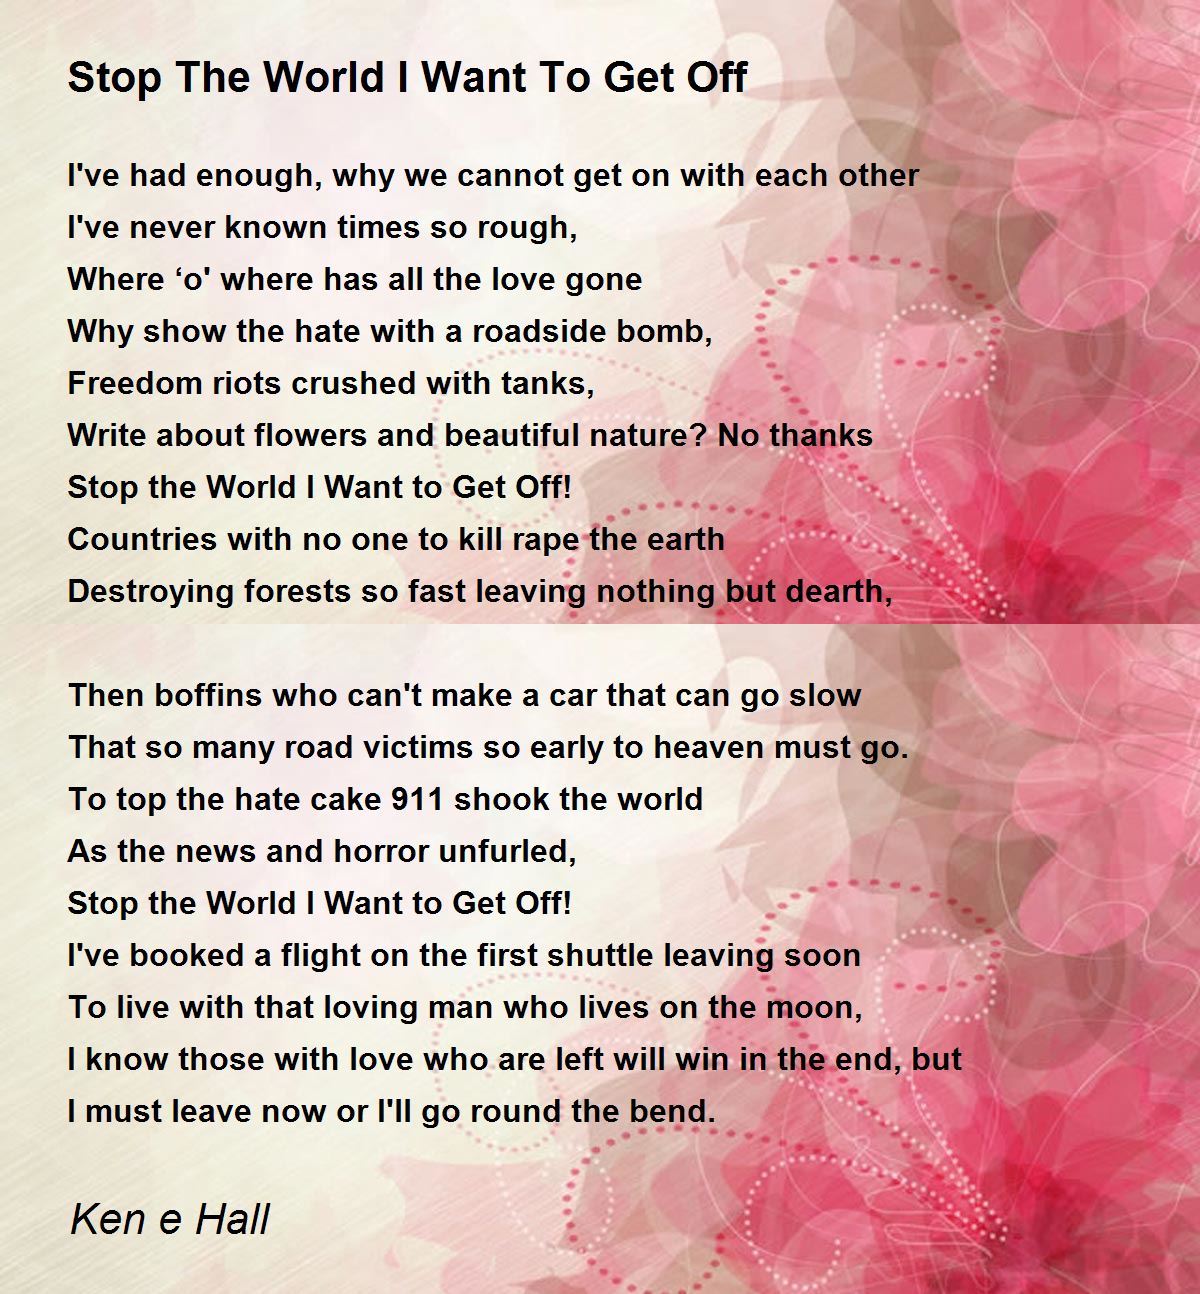 Stop The World I Want To Get Off - Stop The World I Want To Get Off Poem By Ken E Hall